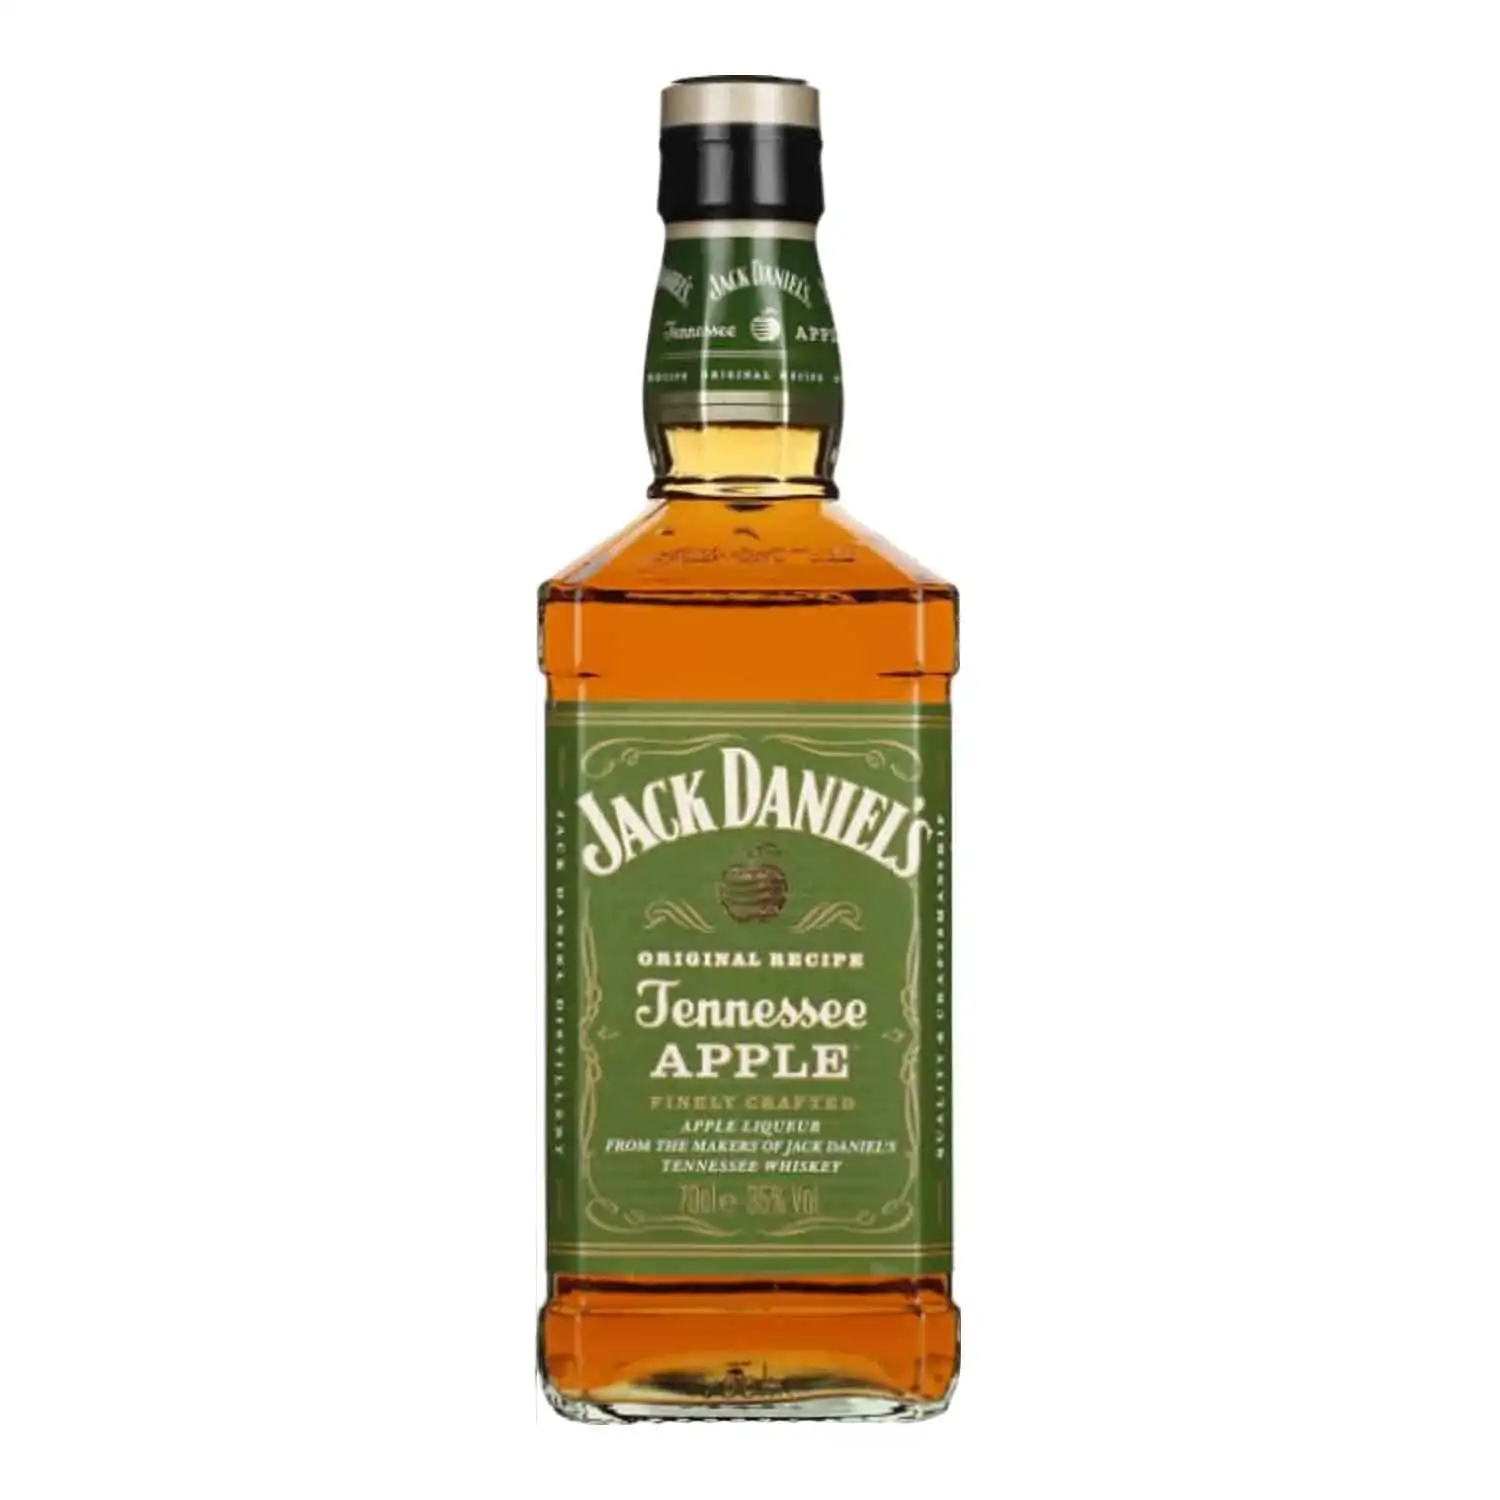 J. Daniel's tennessee pomme 70cl Alc 35% - Buy at Real Tobacco